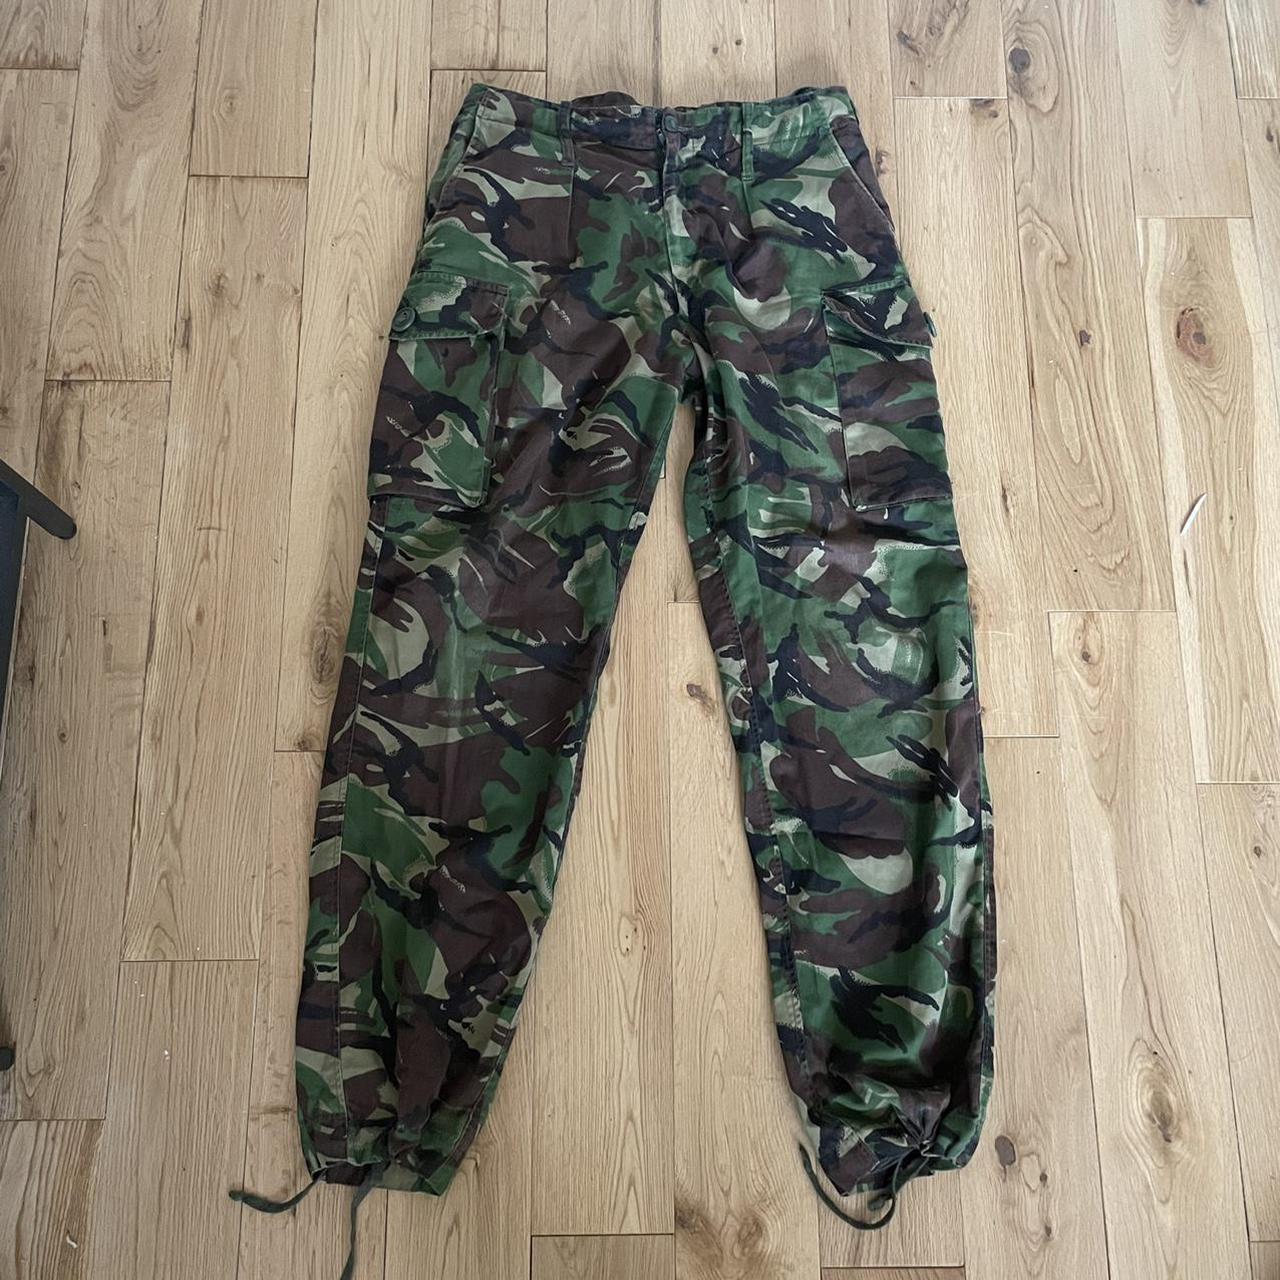 Amazing vintage camo trousers with adjustable... - Depop